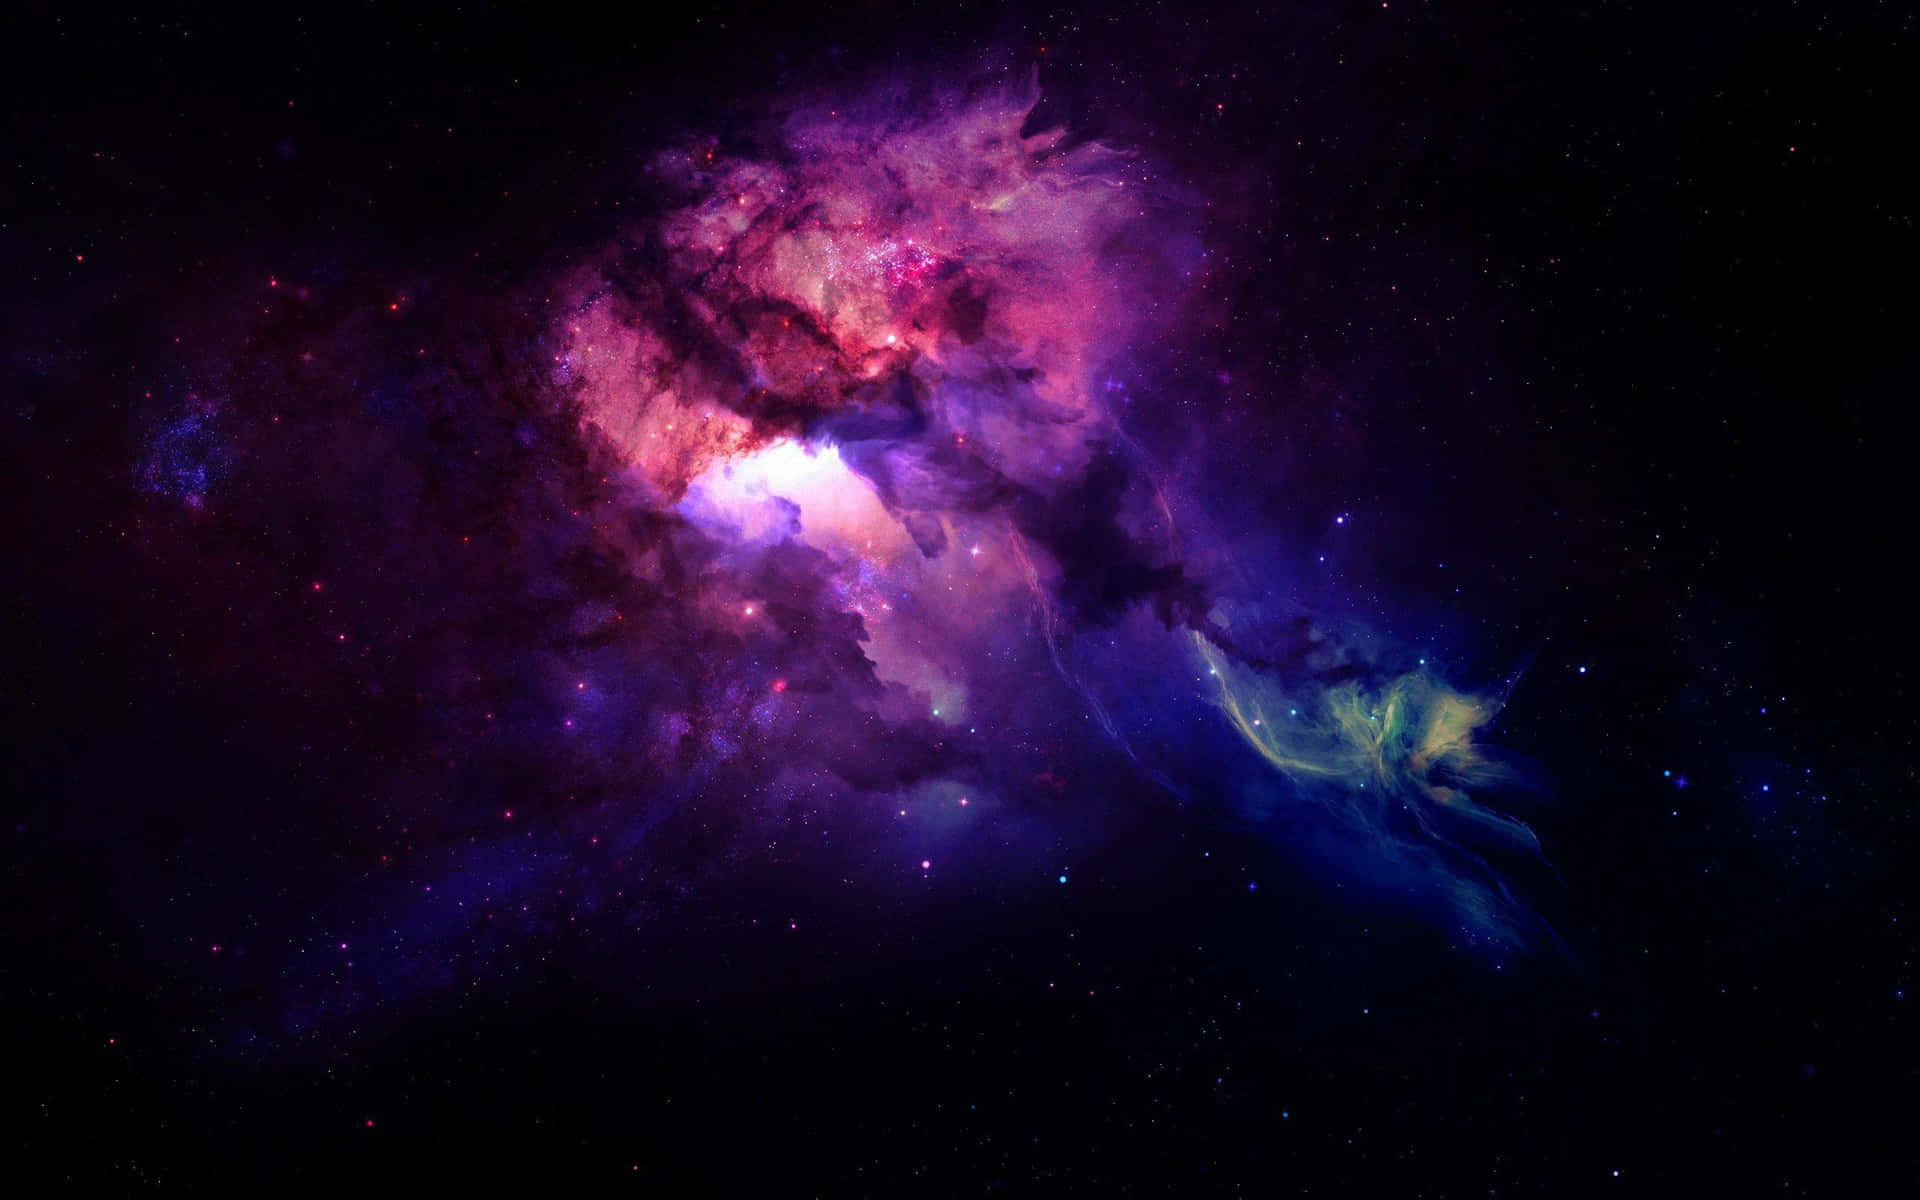 "The beauty of the universe radiates from this magnificent galaxy-themed artwork." Wallpaper